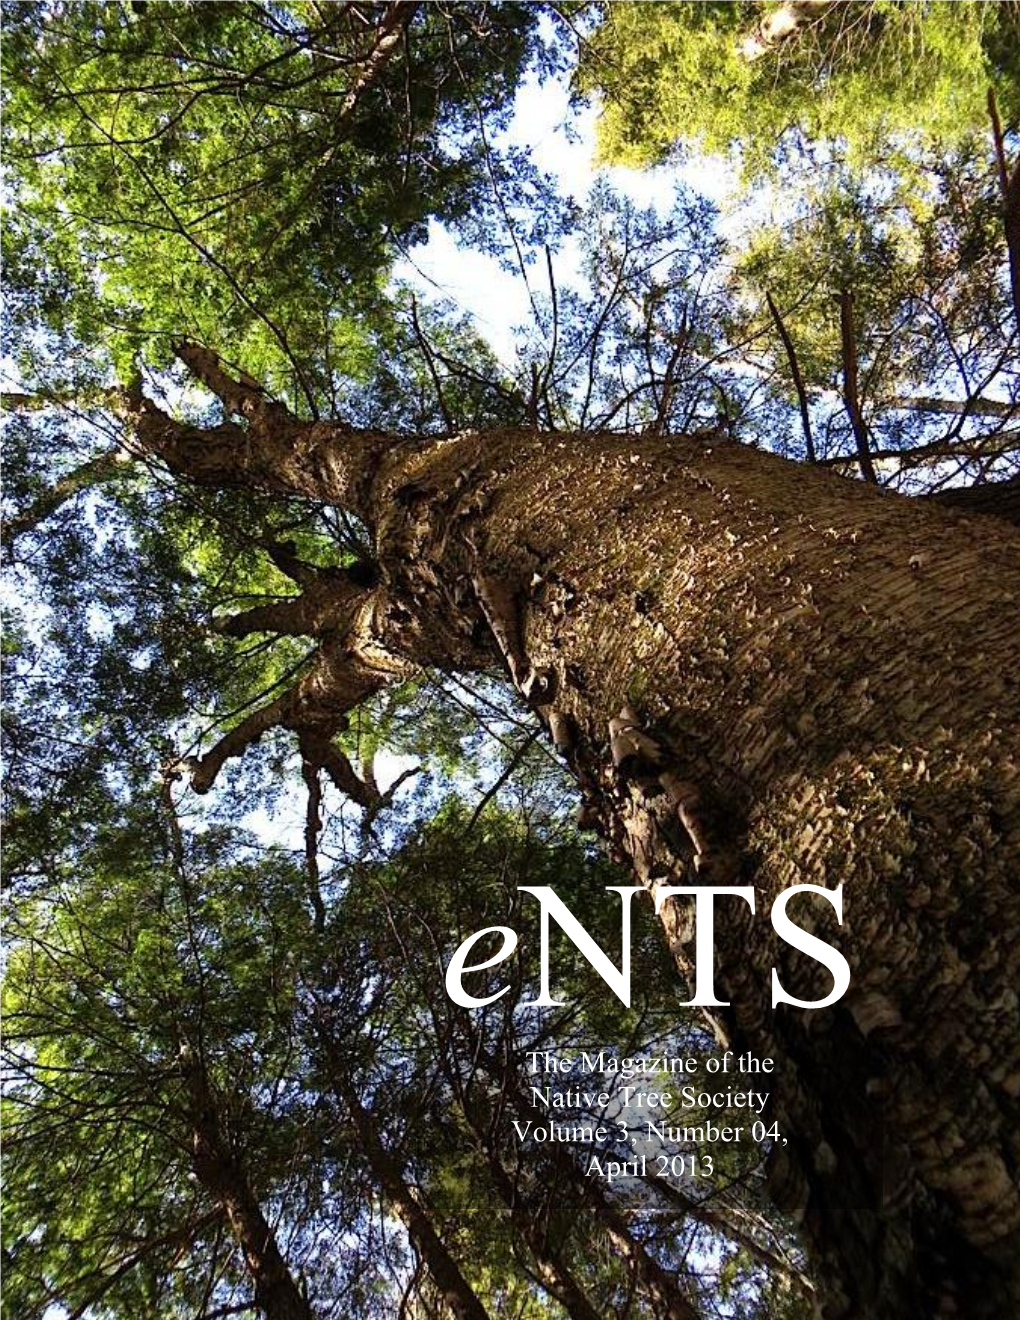 The Magazine of the Native Tree Society Volume 3, Number 04, April 2013